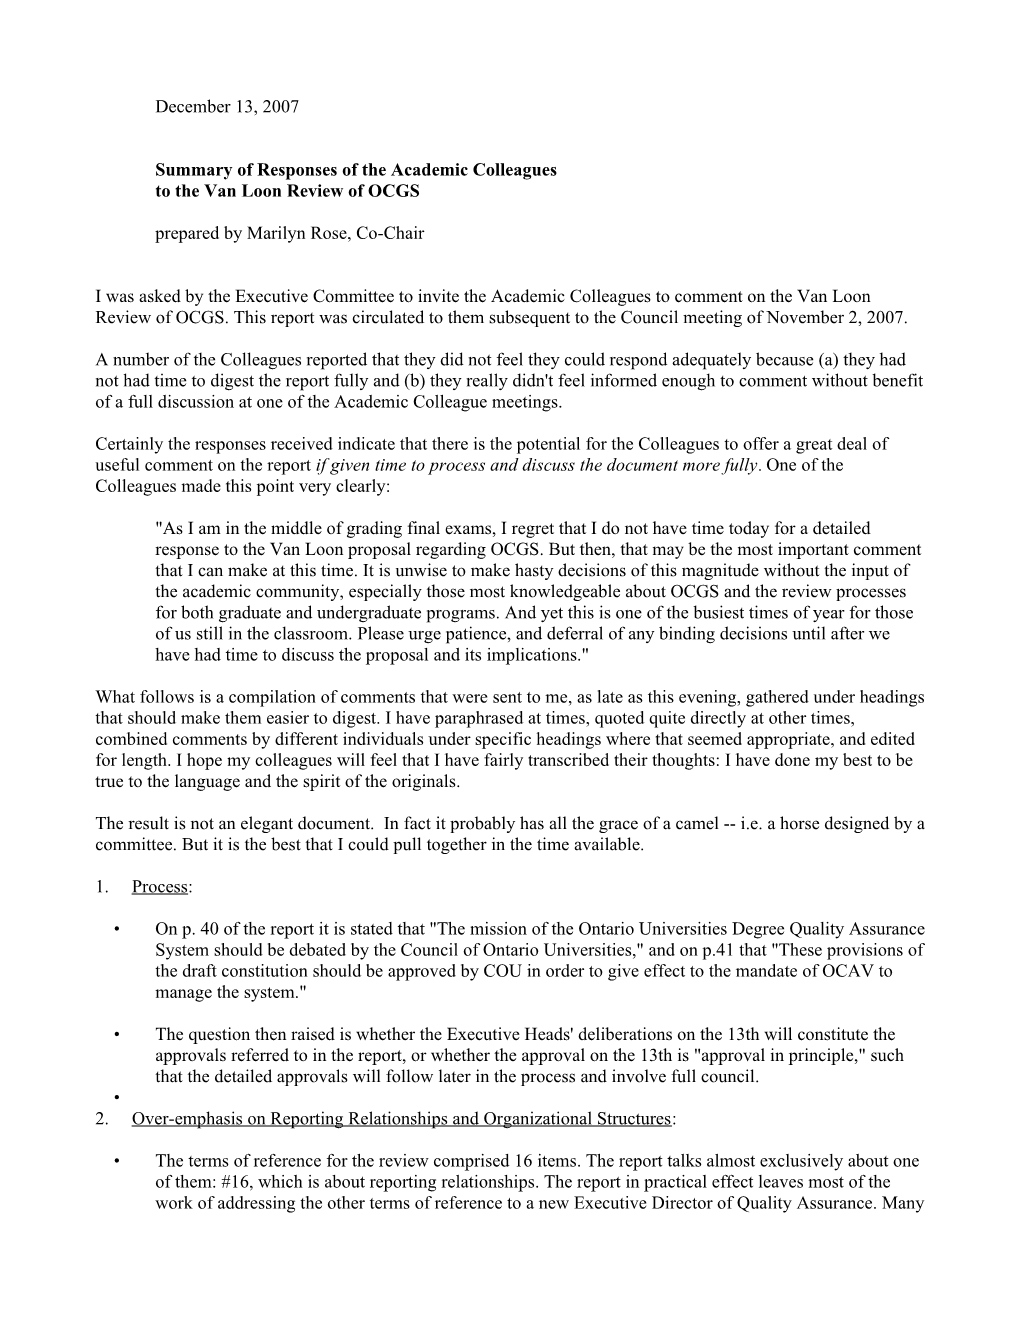 December 13, 2007 Summary of Responses of the Academic Colleagues to the Van Loon Review